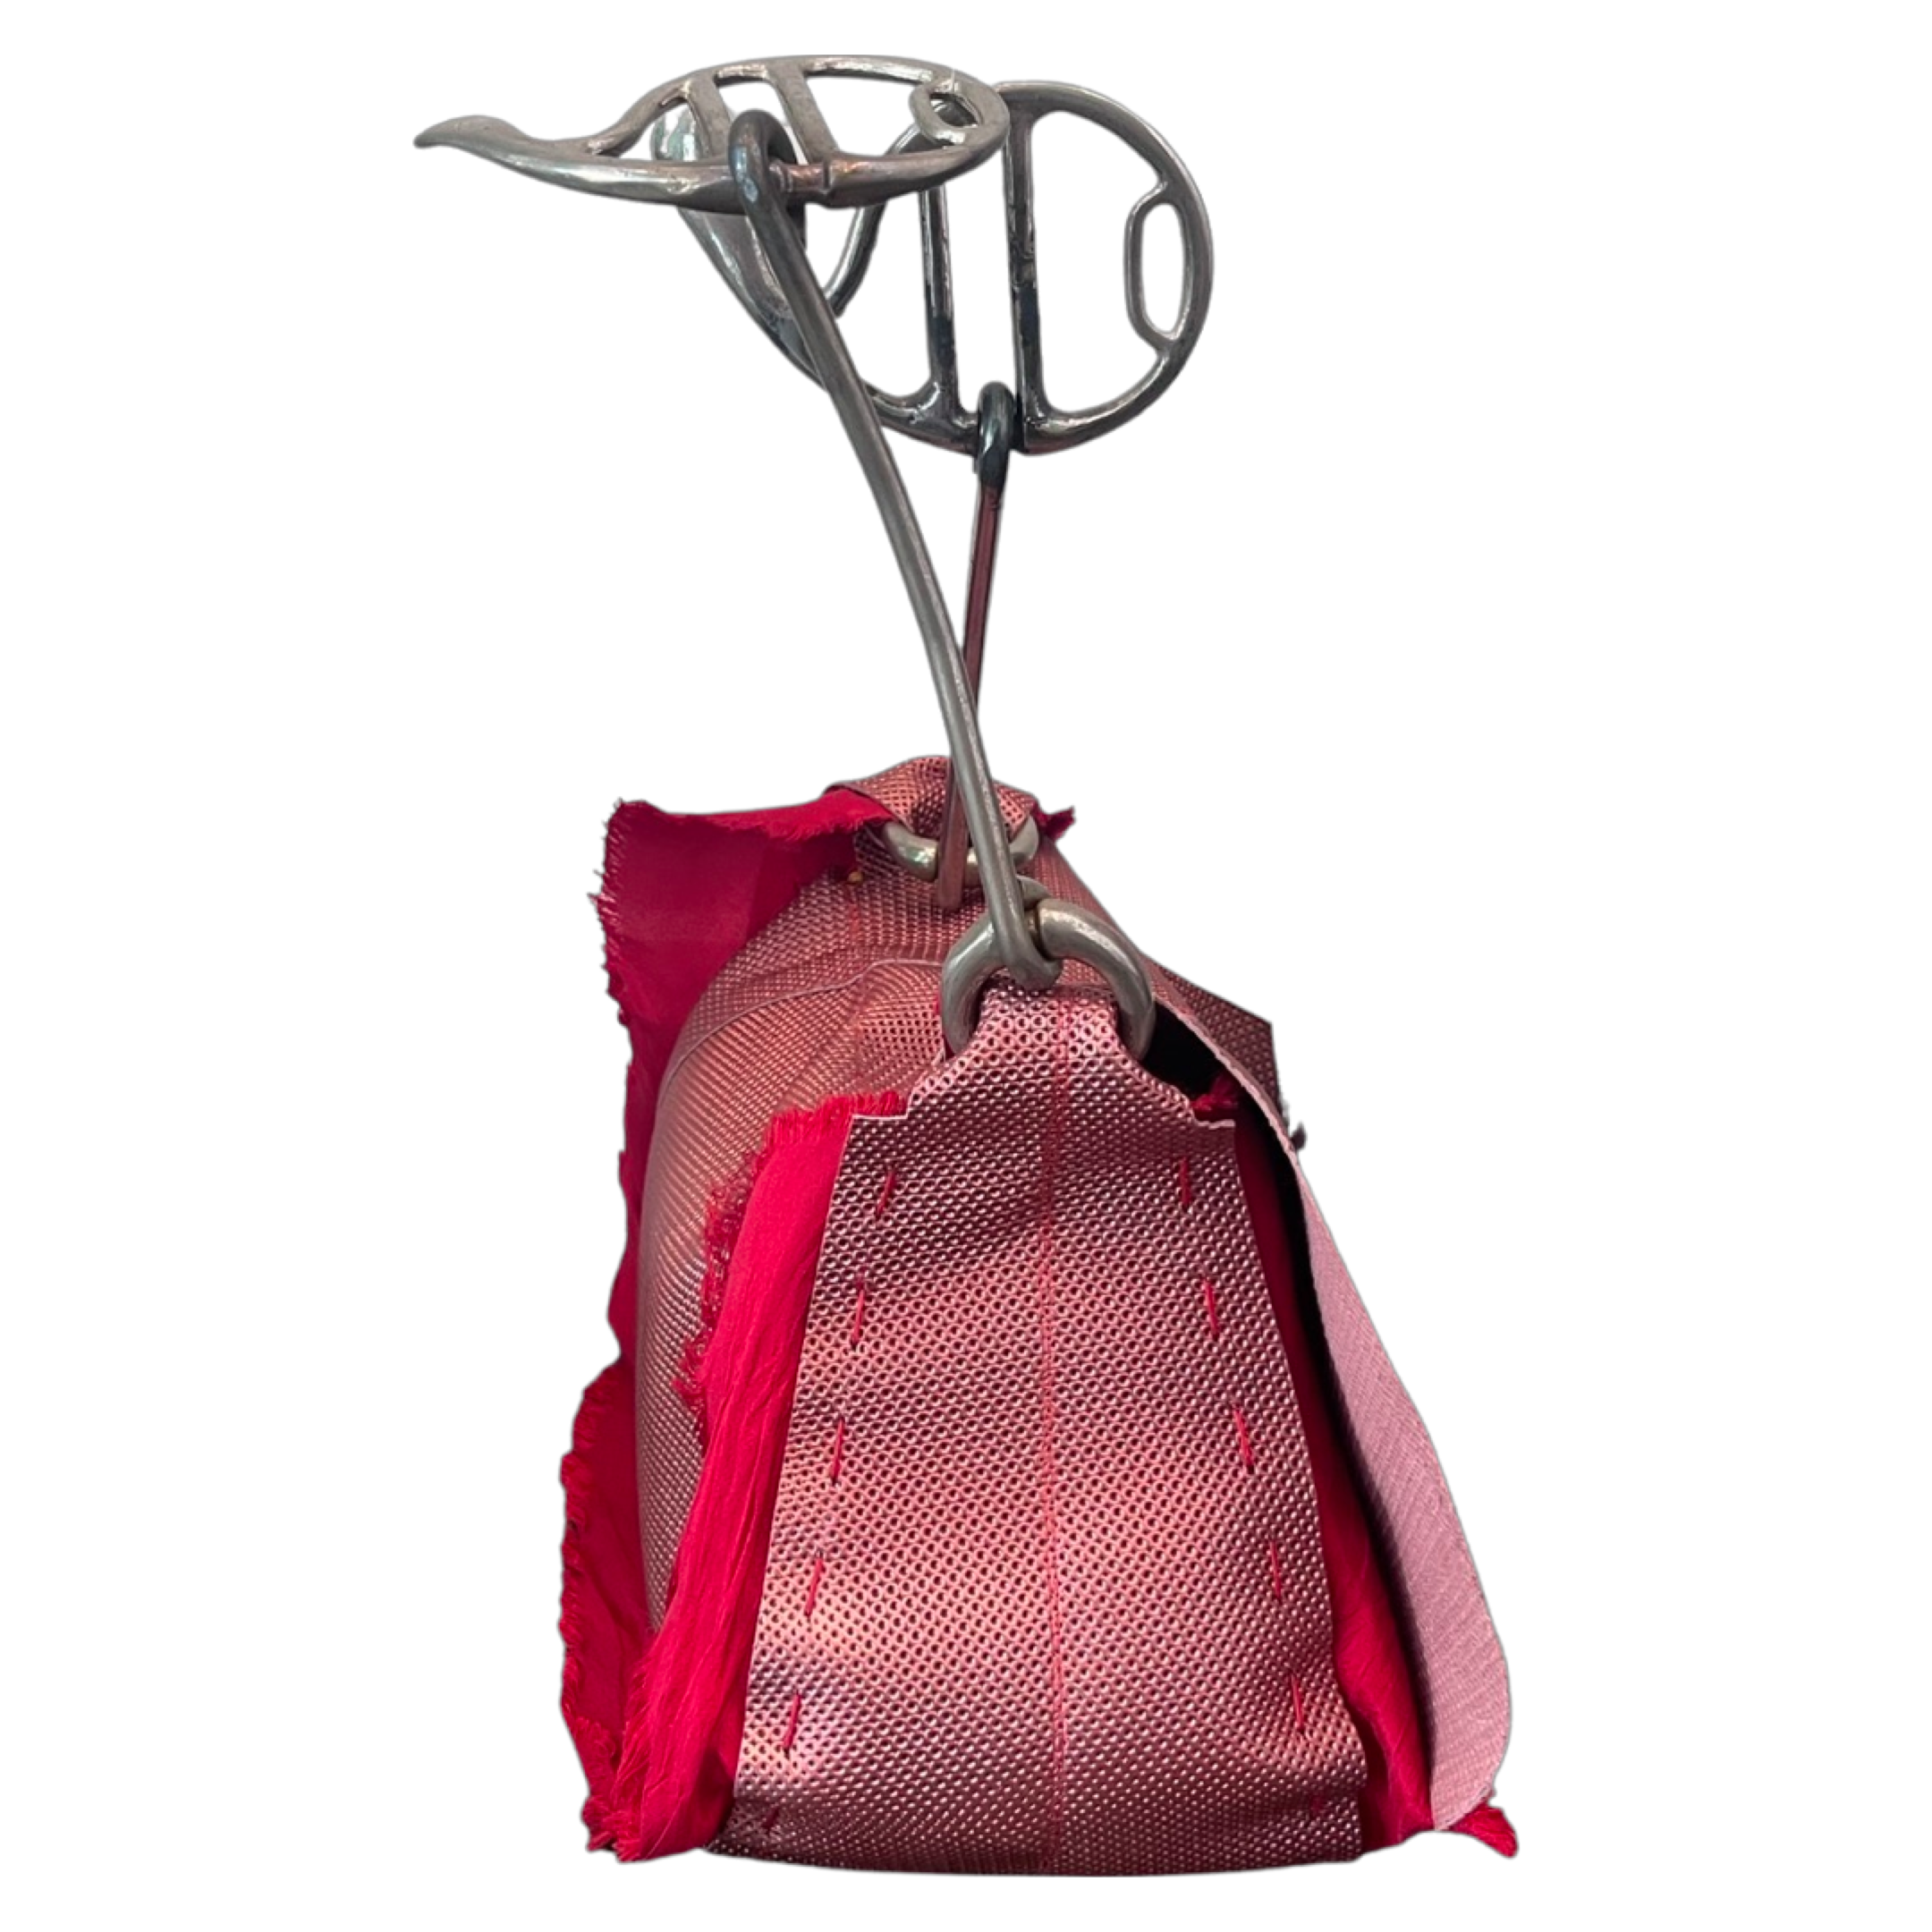 Manola's Bag in Textured Red